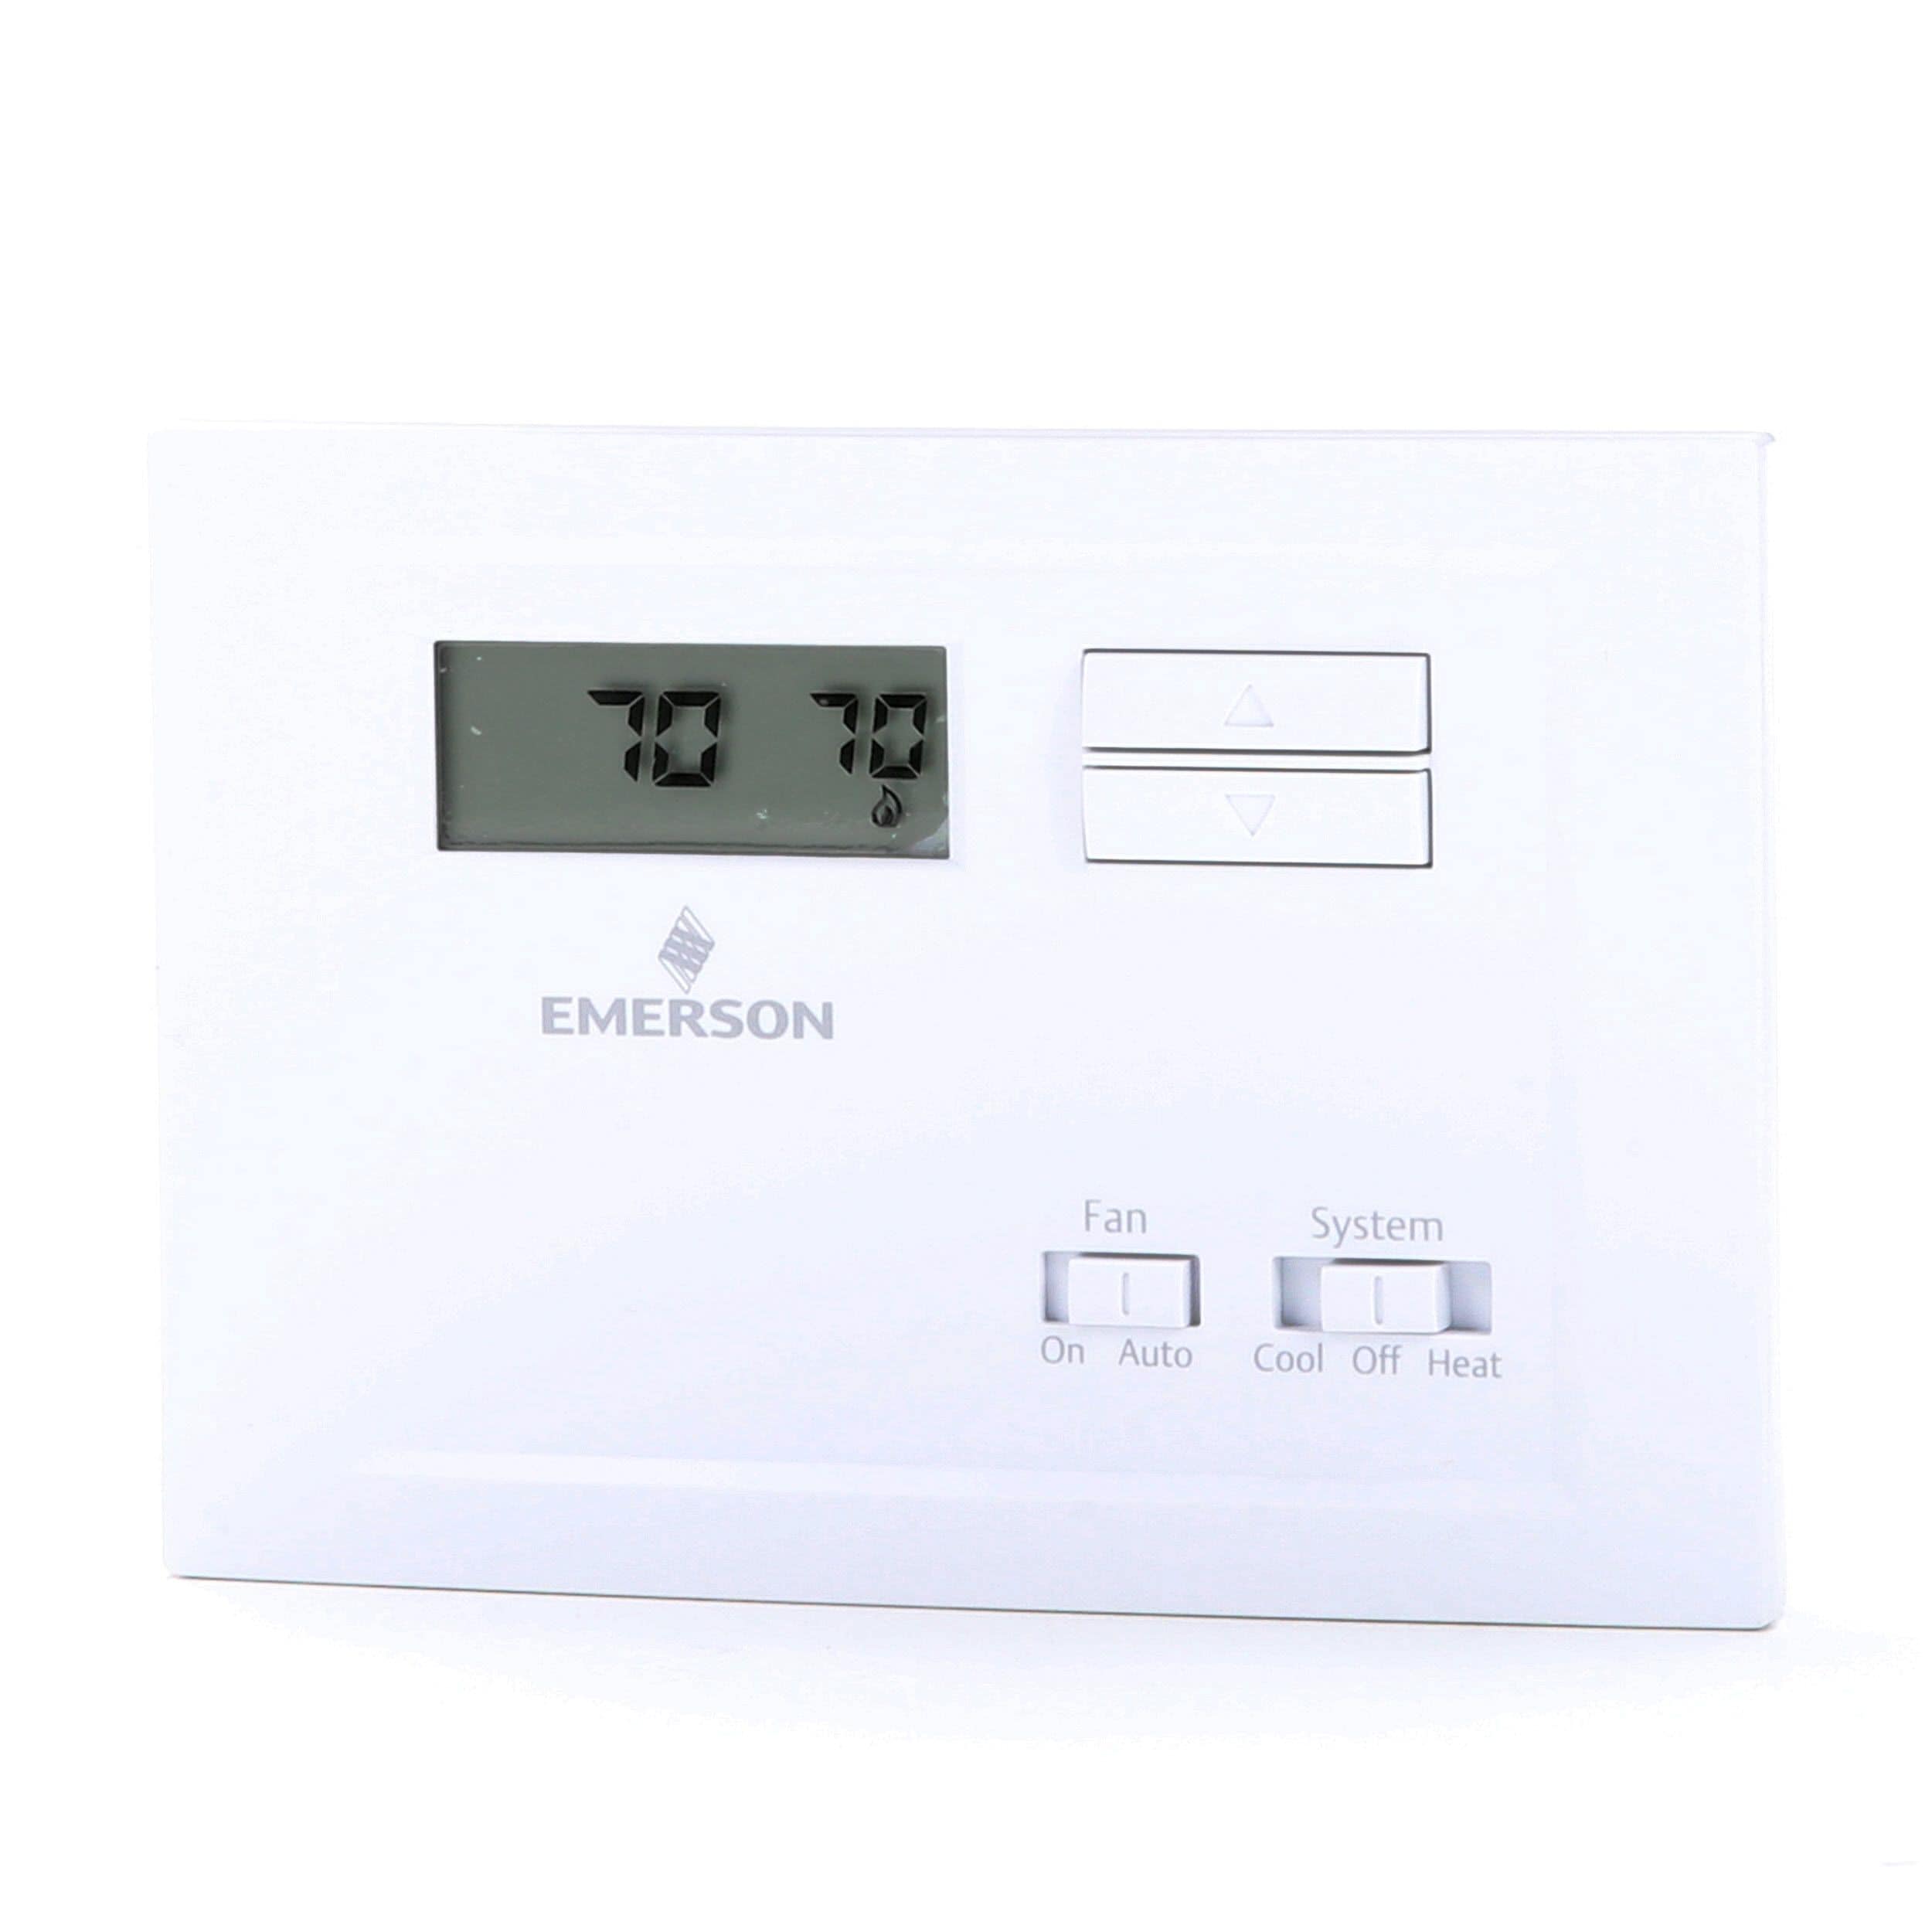 New Emerson EasyHeat Non-Programmable Floor Warming Thermostat FG 120/240V 15A 